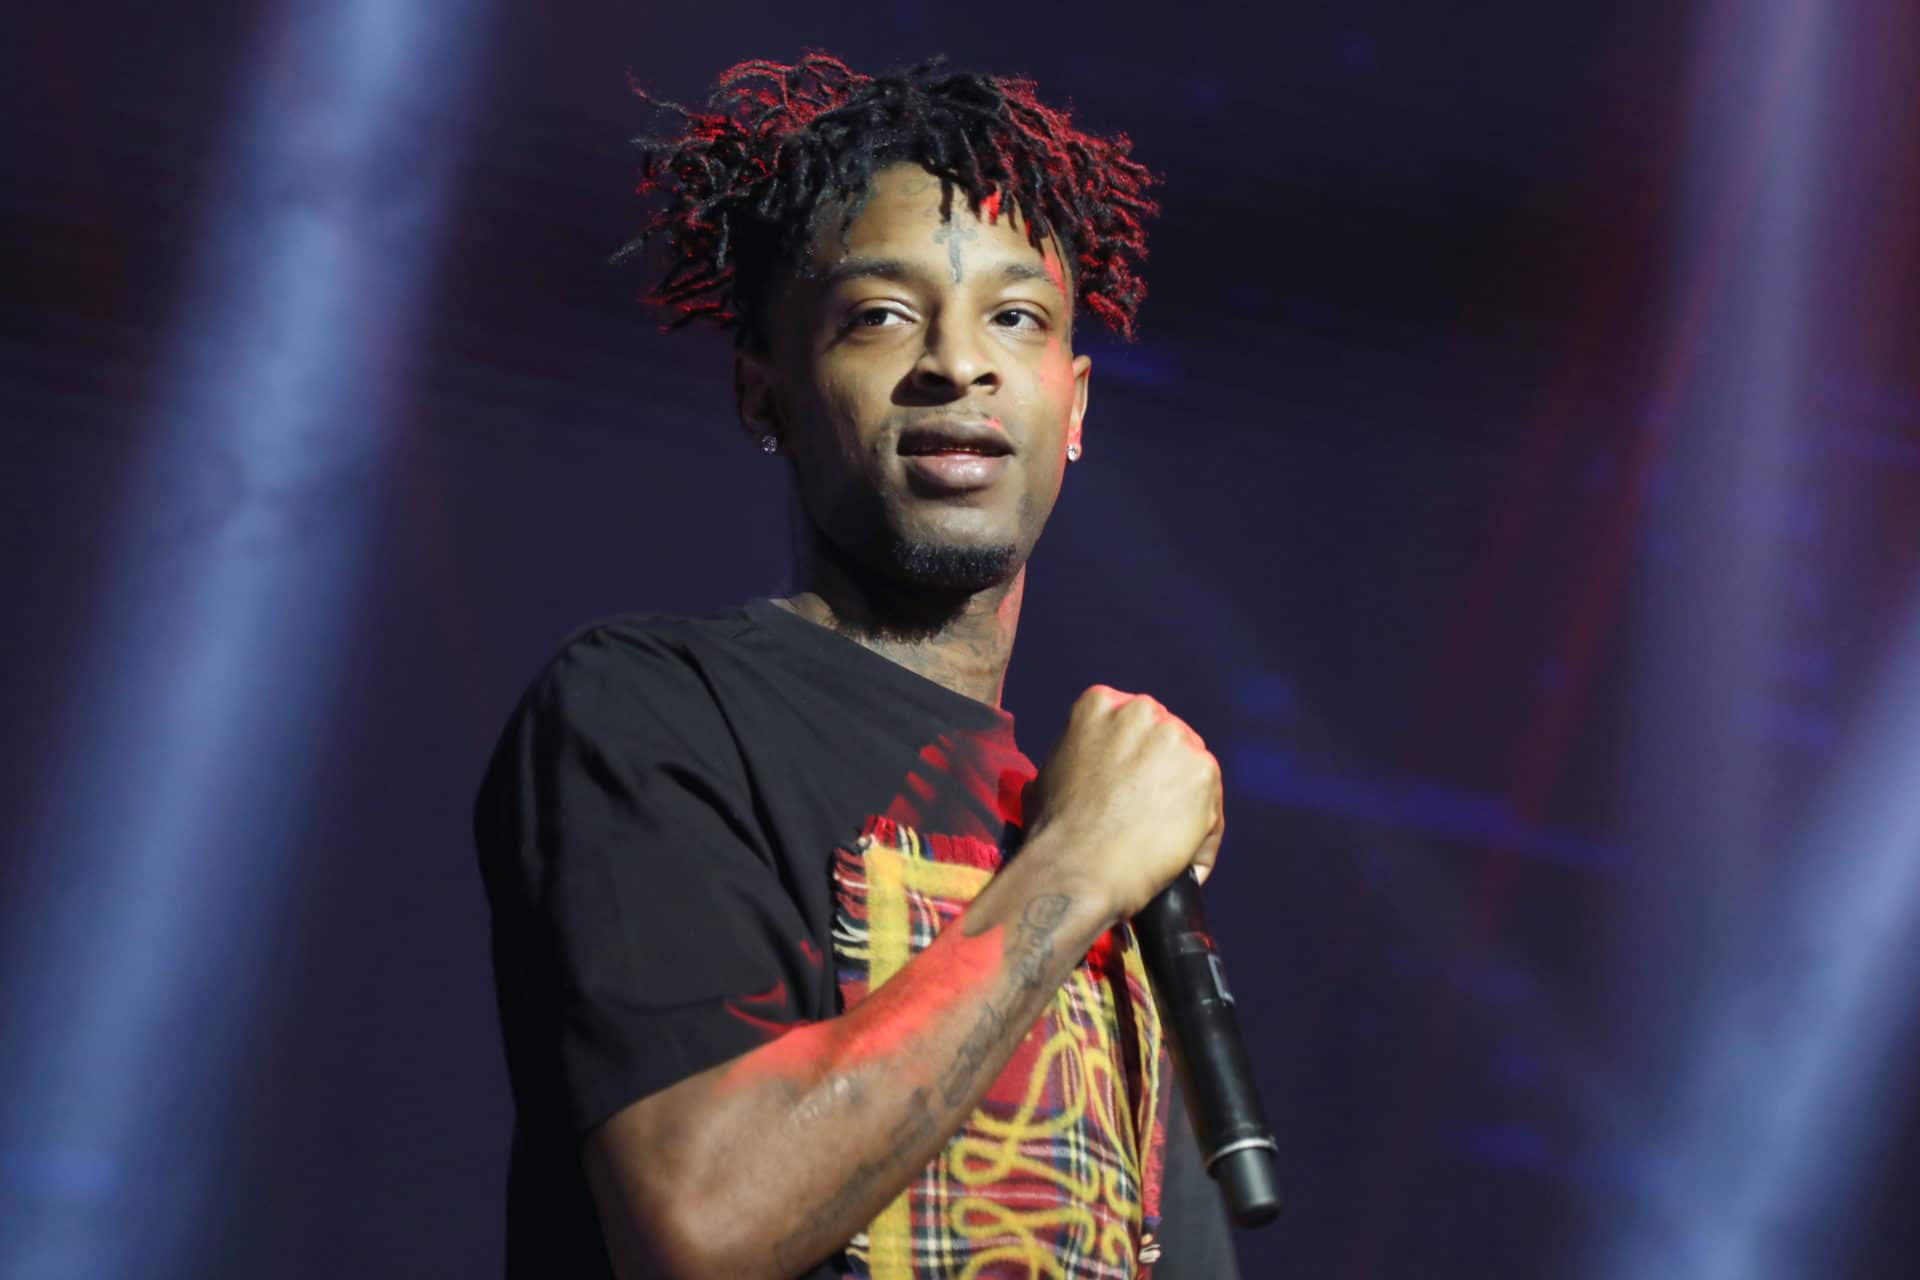 21 Savage Is in 'One of the Worst Immigration Detention Centers